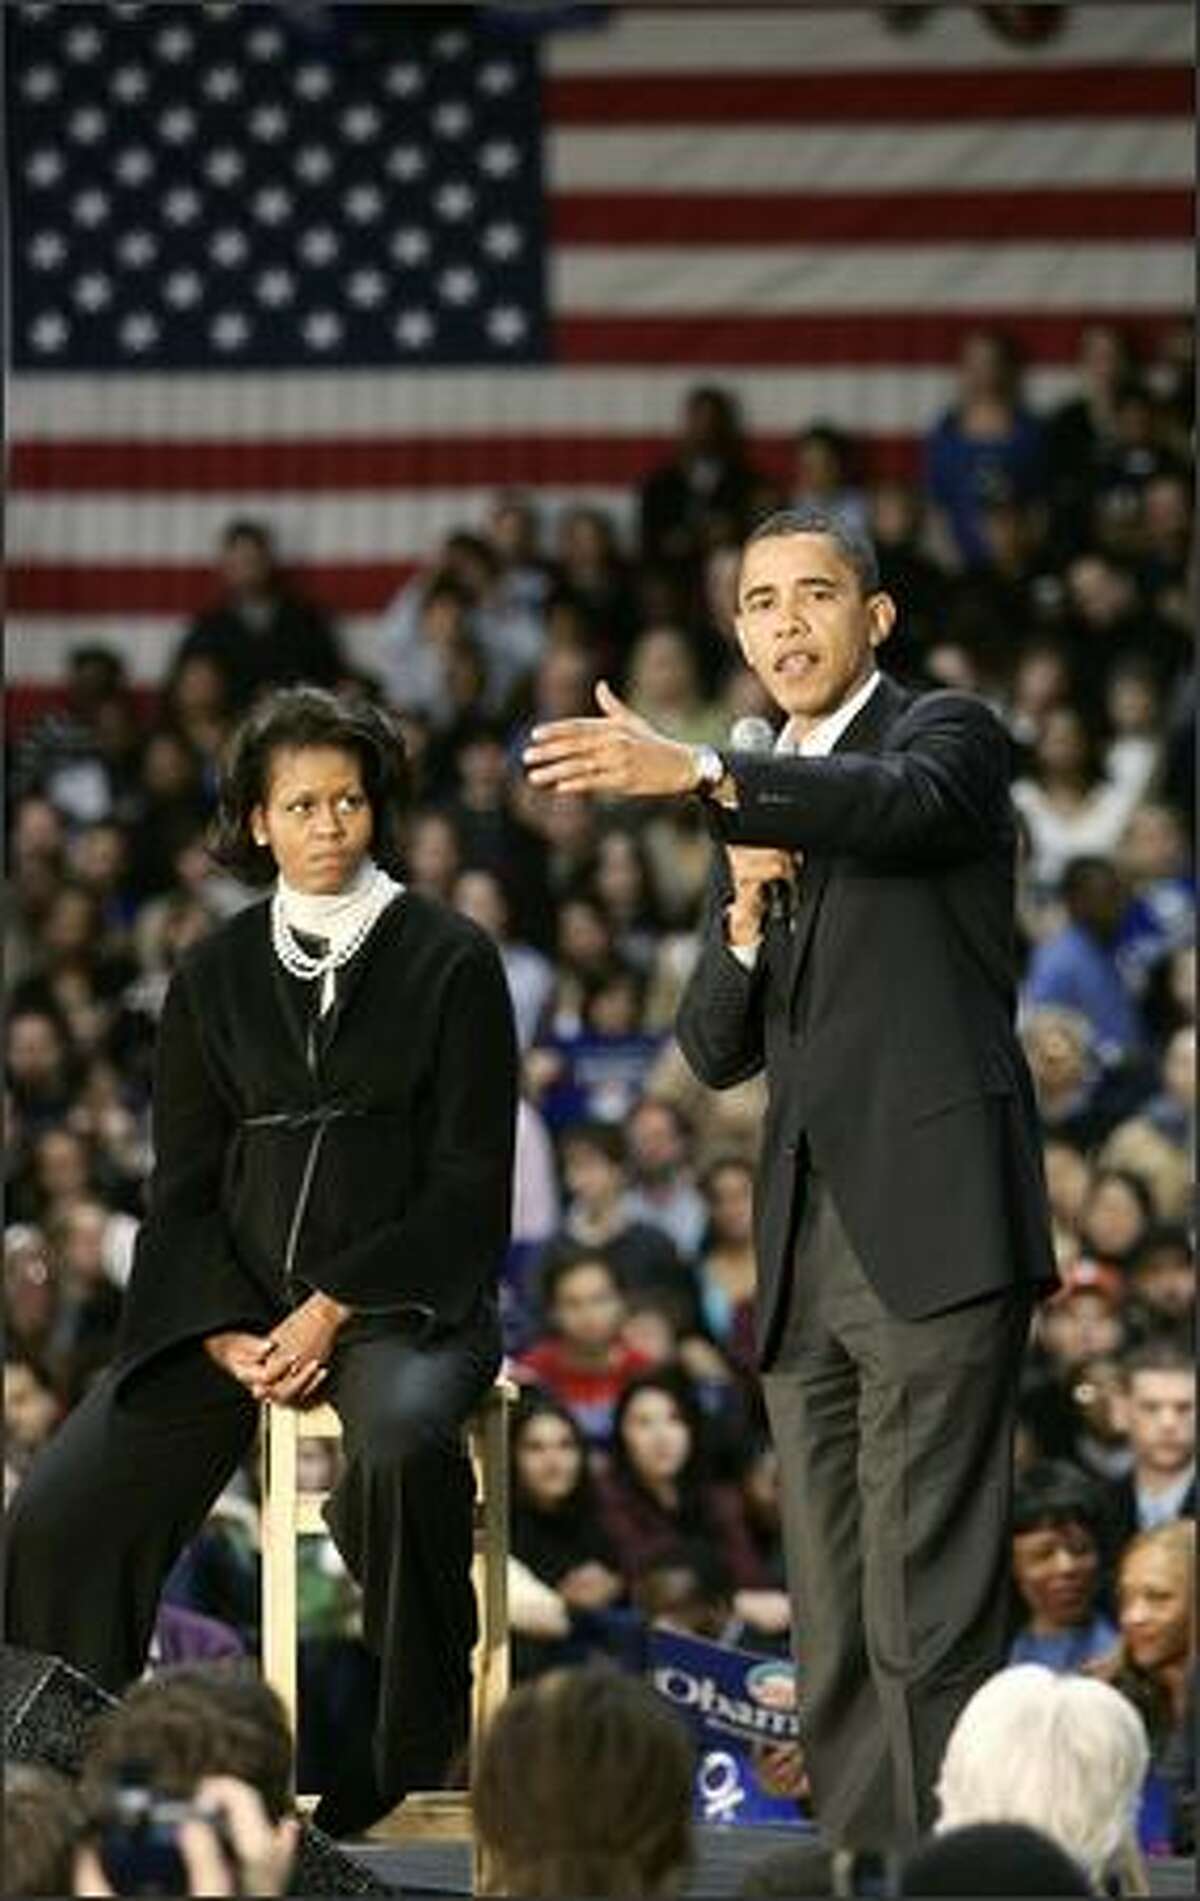 Presidential hopeful Senator Barack Obama, D-IL, speaks during a rally 11 Feb. 2007 at the University of Illinois at Chicago Pavilion in Chicago, as his wife watches.